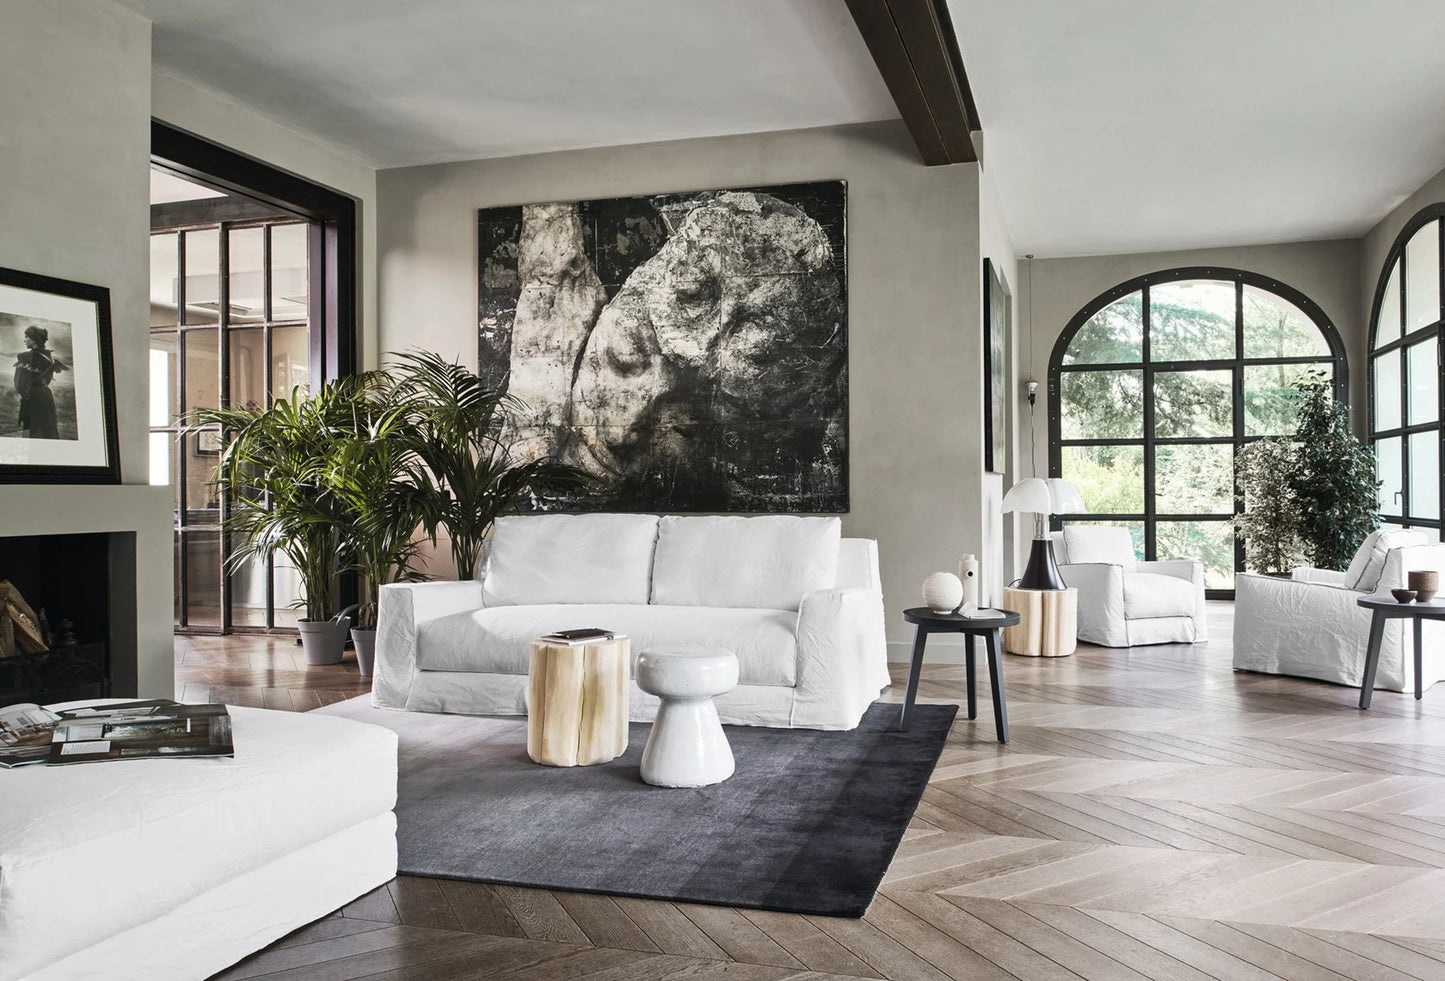 Gervasoni Loll 12 Sofa in White Linen Upholstery by Paola Navone - $7,750.00